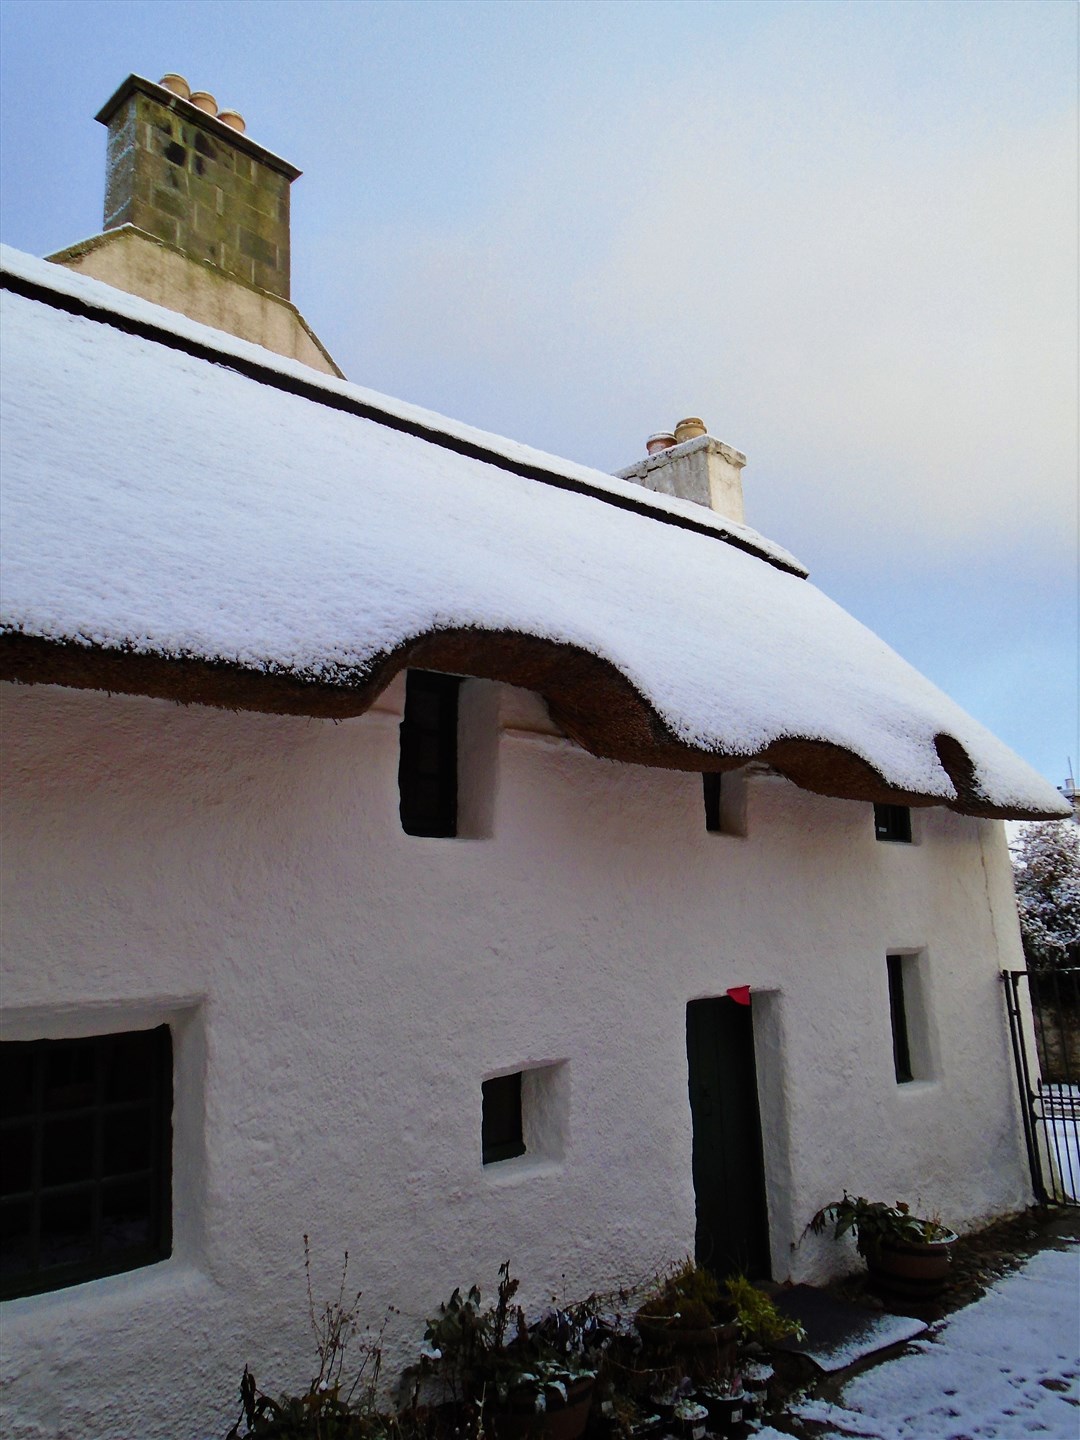 Hugh Miller's Cottage pictured in the snow. It will become the first window to light up a Cromarty advent trail starting on December 1.